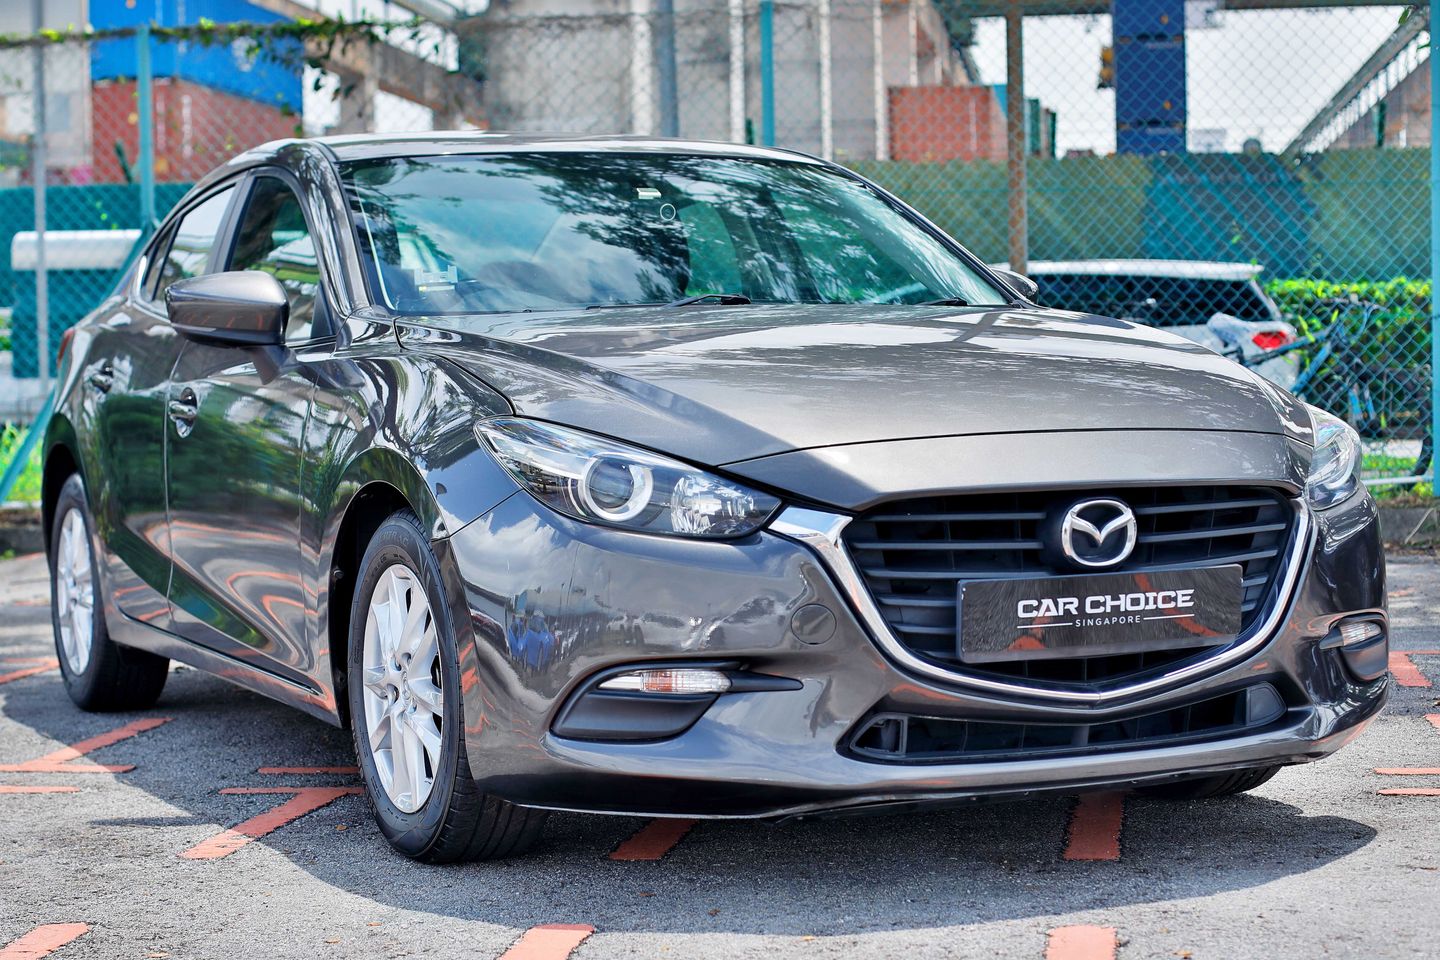 Certified Pre-Owned Mazda 3 1.5 Sunroof | Car Choice Singapore